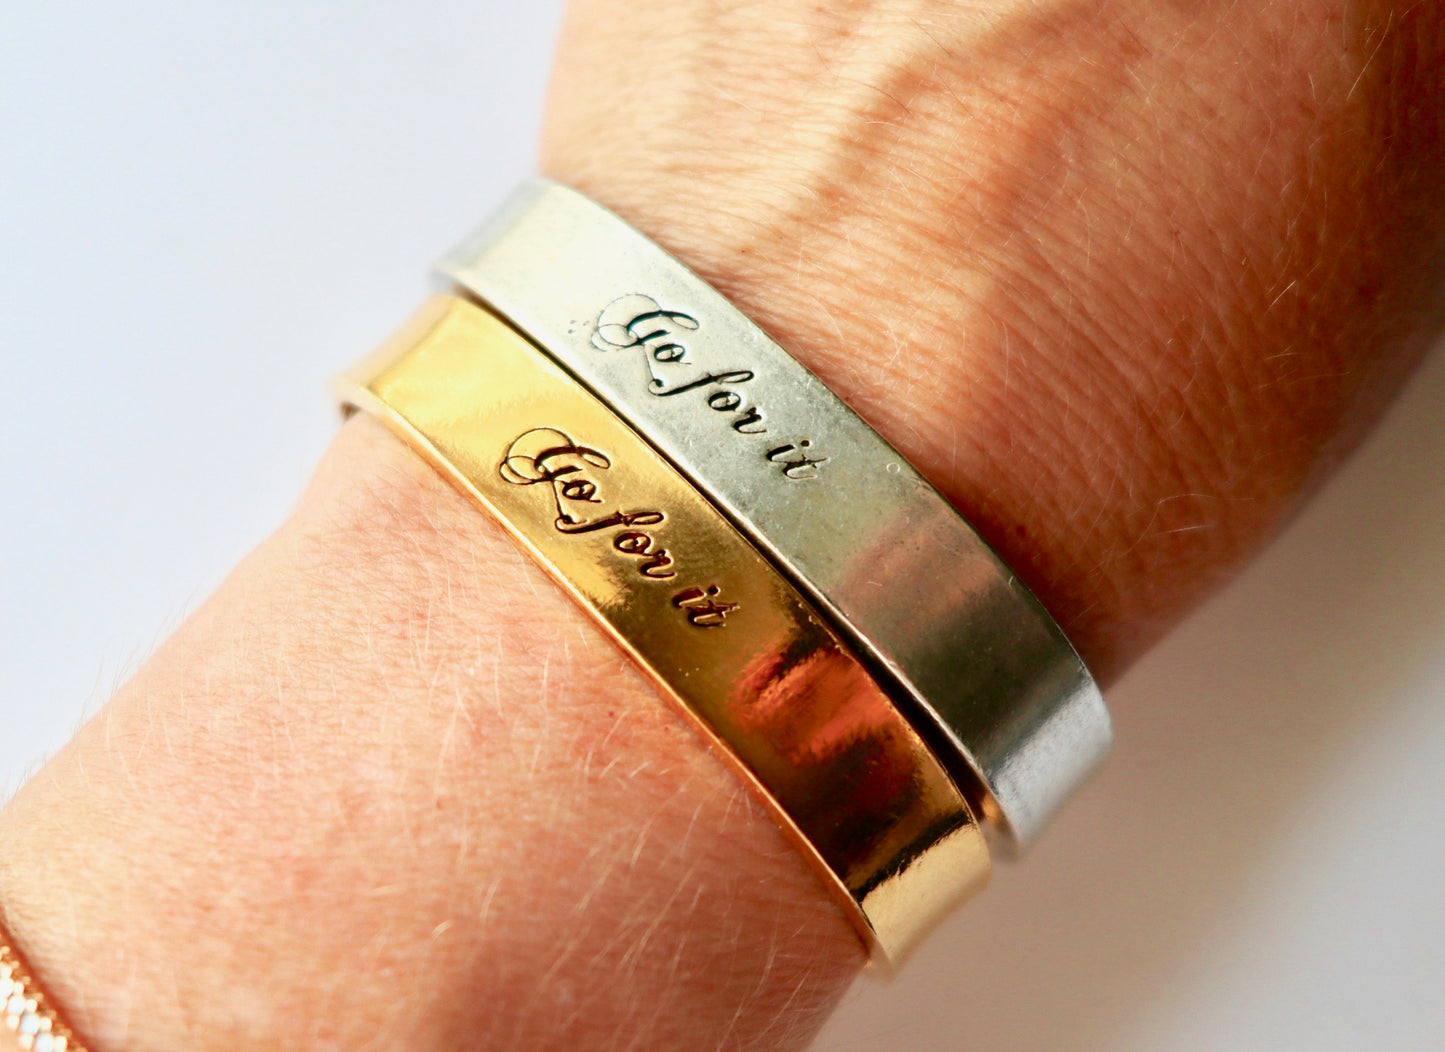 Go For It Cuff Hand Stamped Bracelet